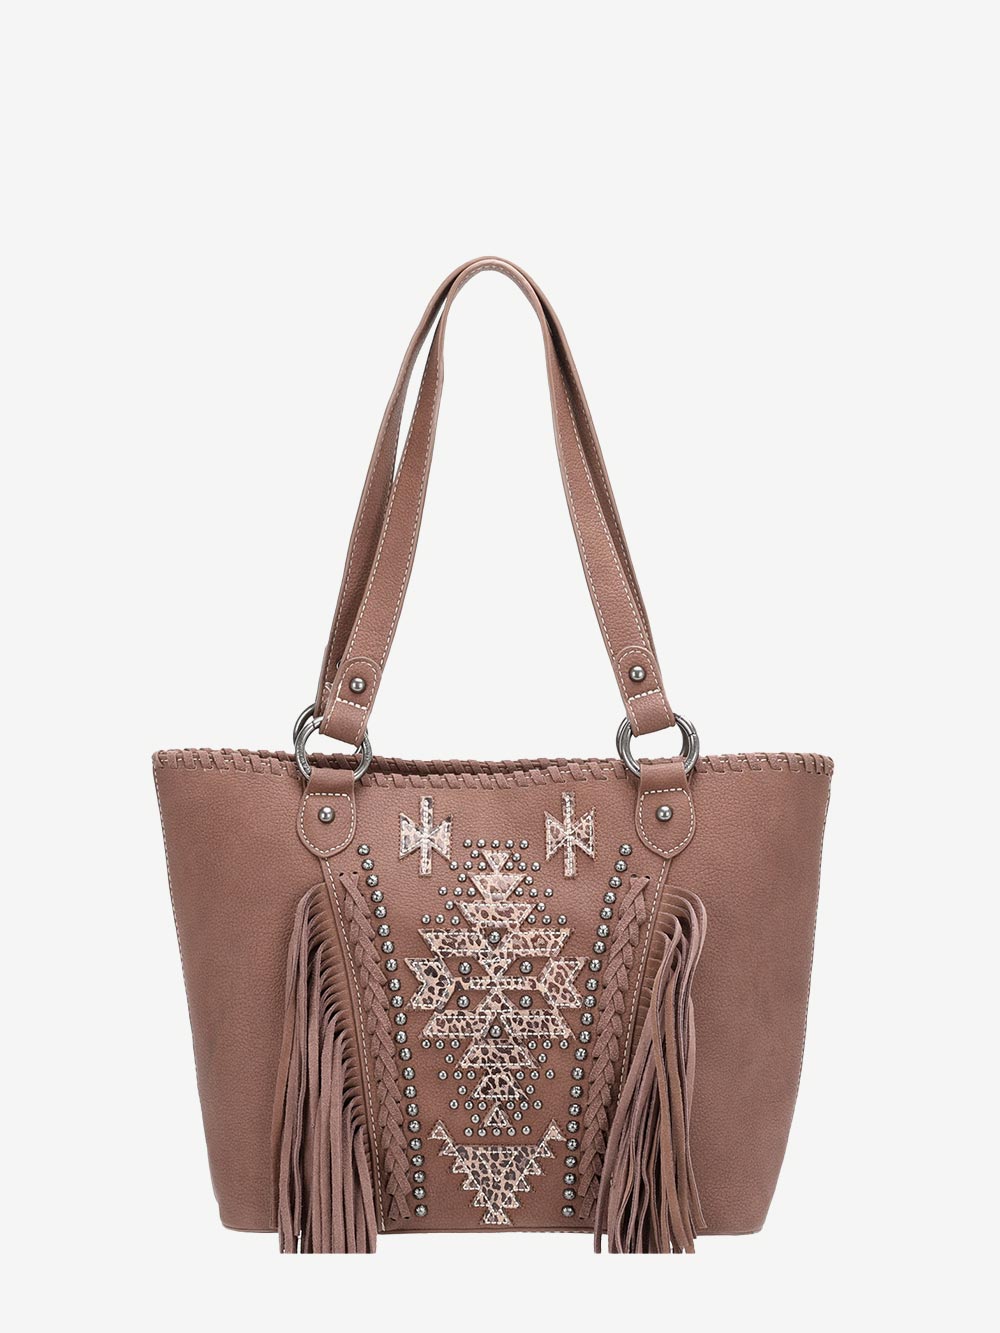 Montana West Geometric Aztec Leather Fringe Concealed Carry Tote - Montana West World